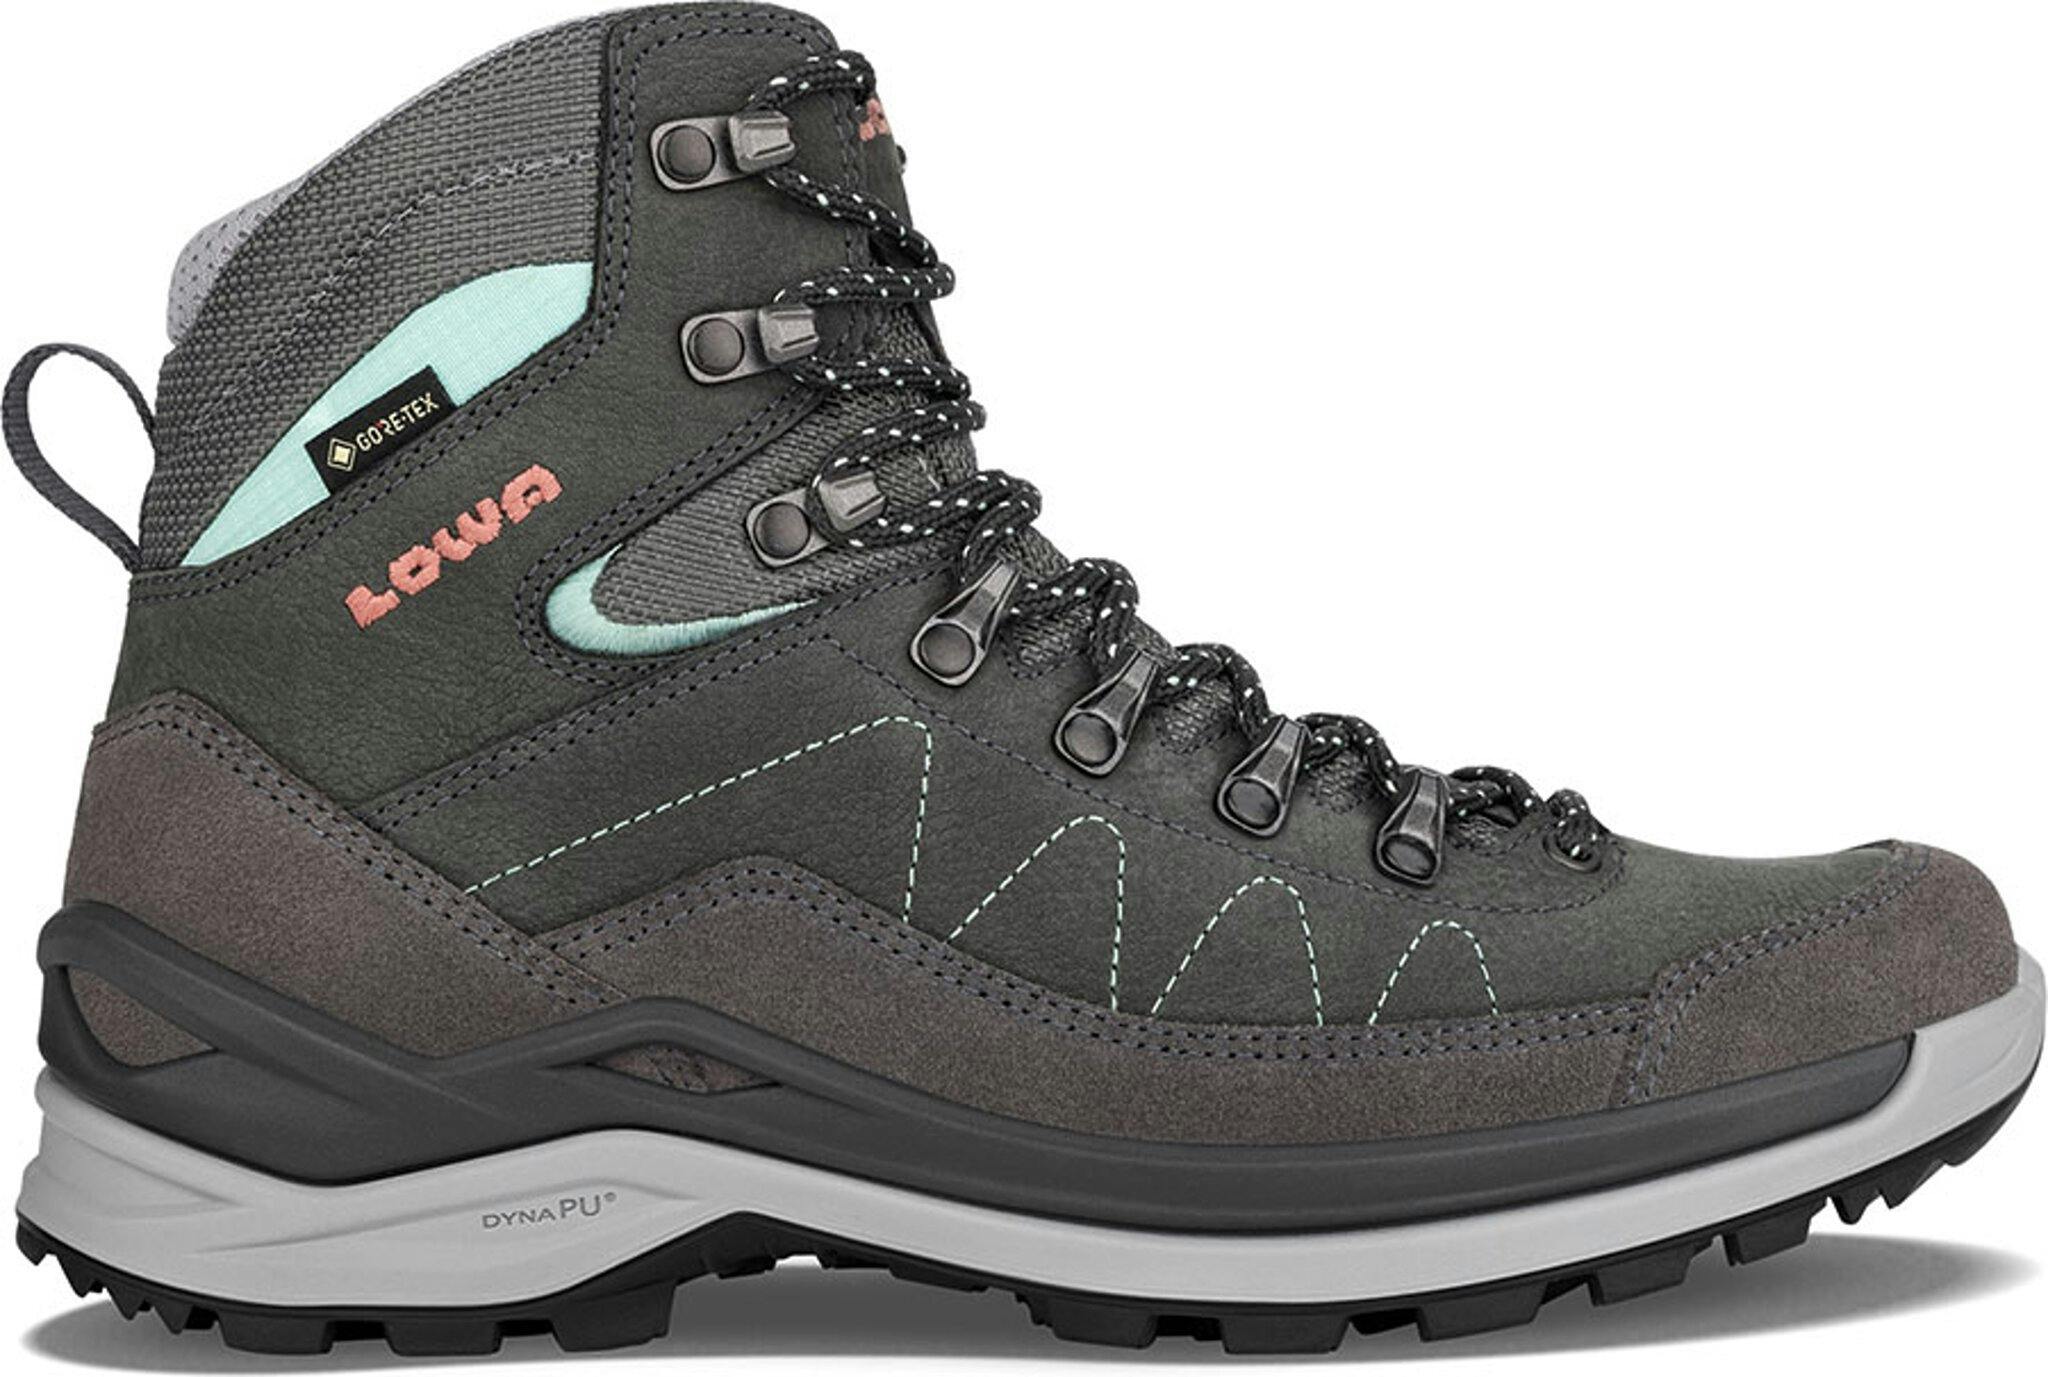 Product image for Toro Pro Gore-Tex Mid Boots - Women's